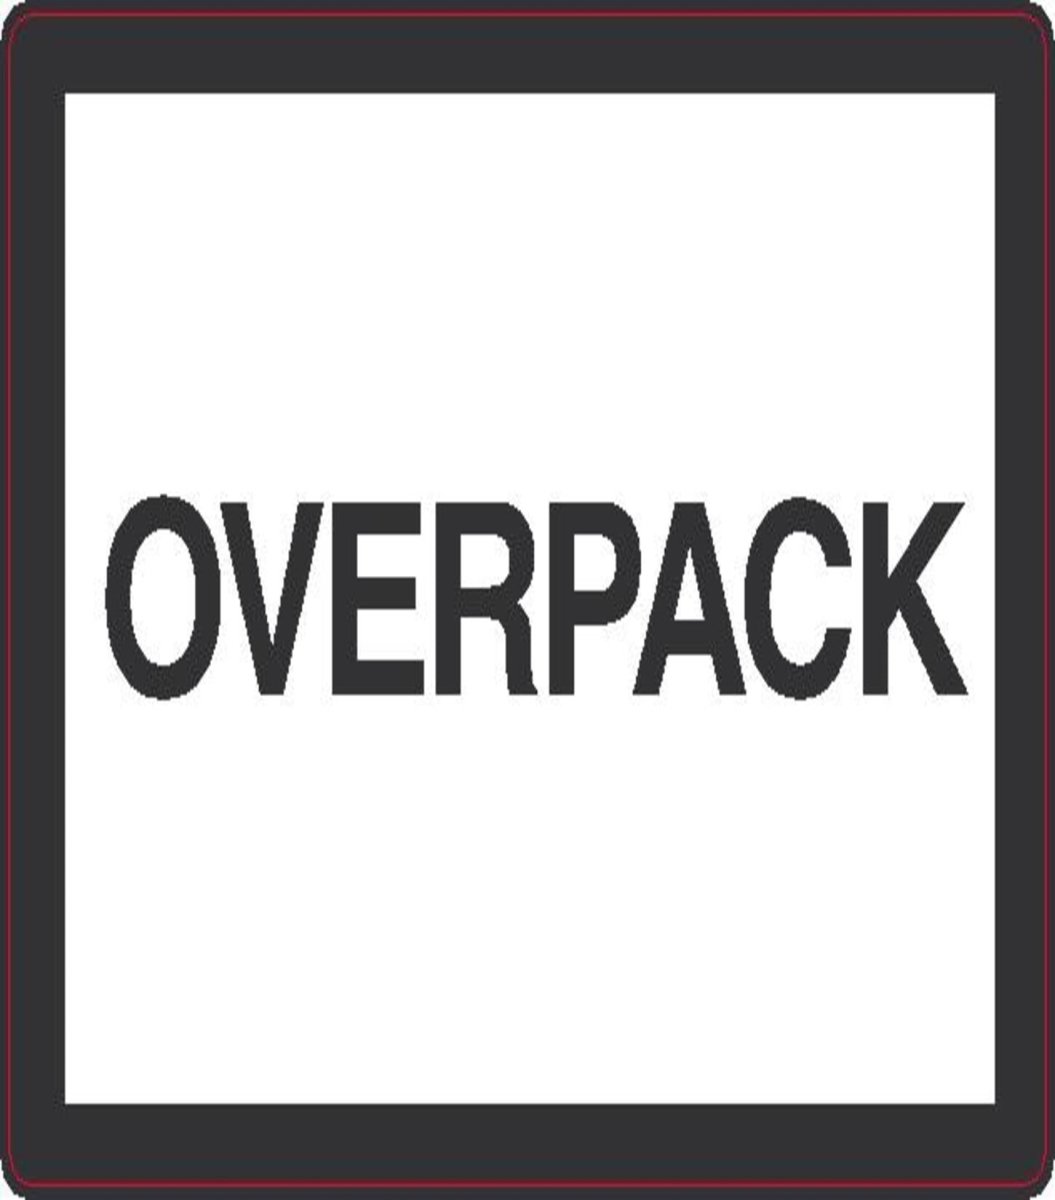 Overpack English - SGS Netherlands